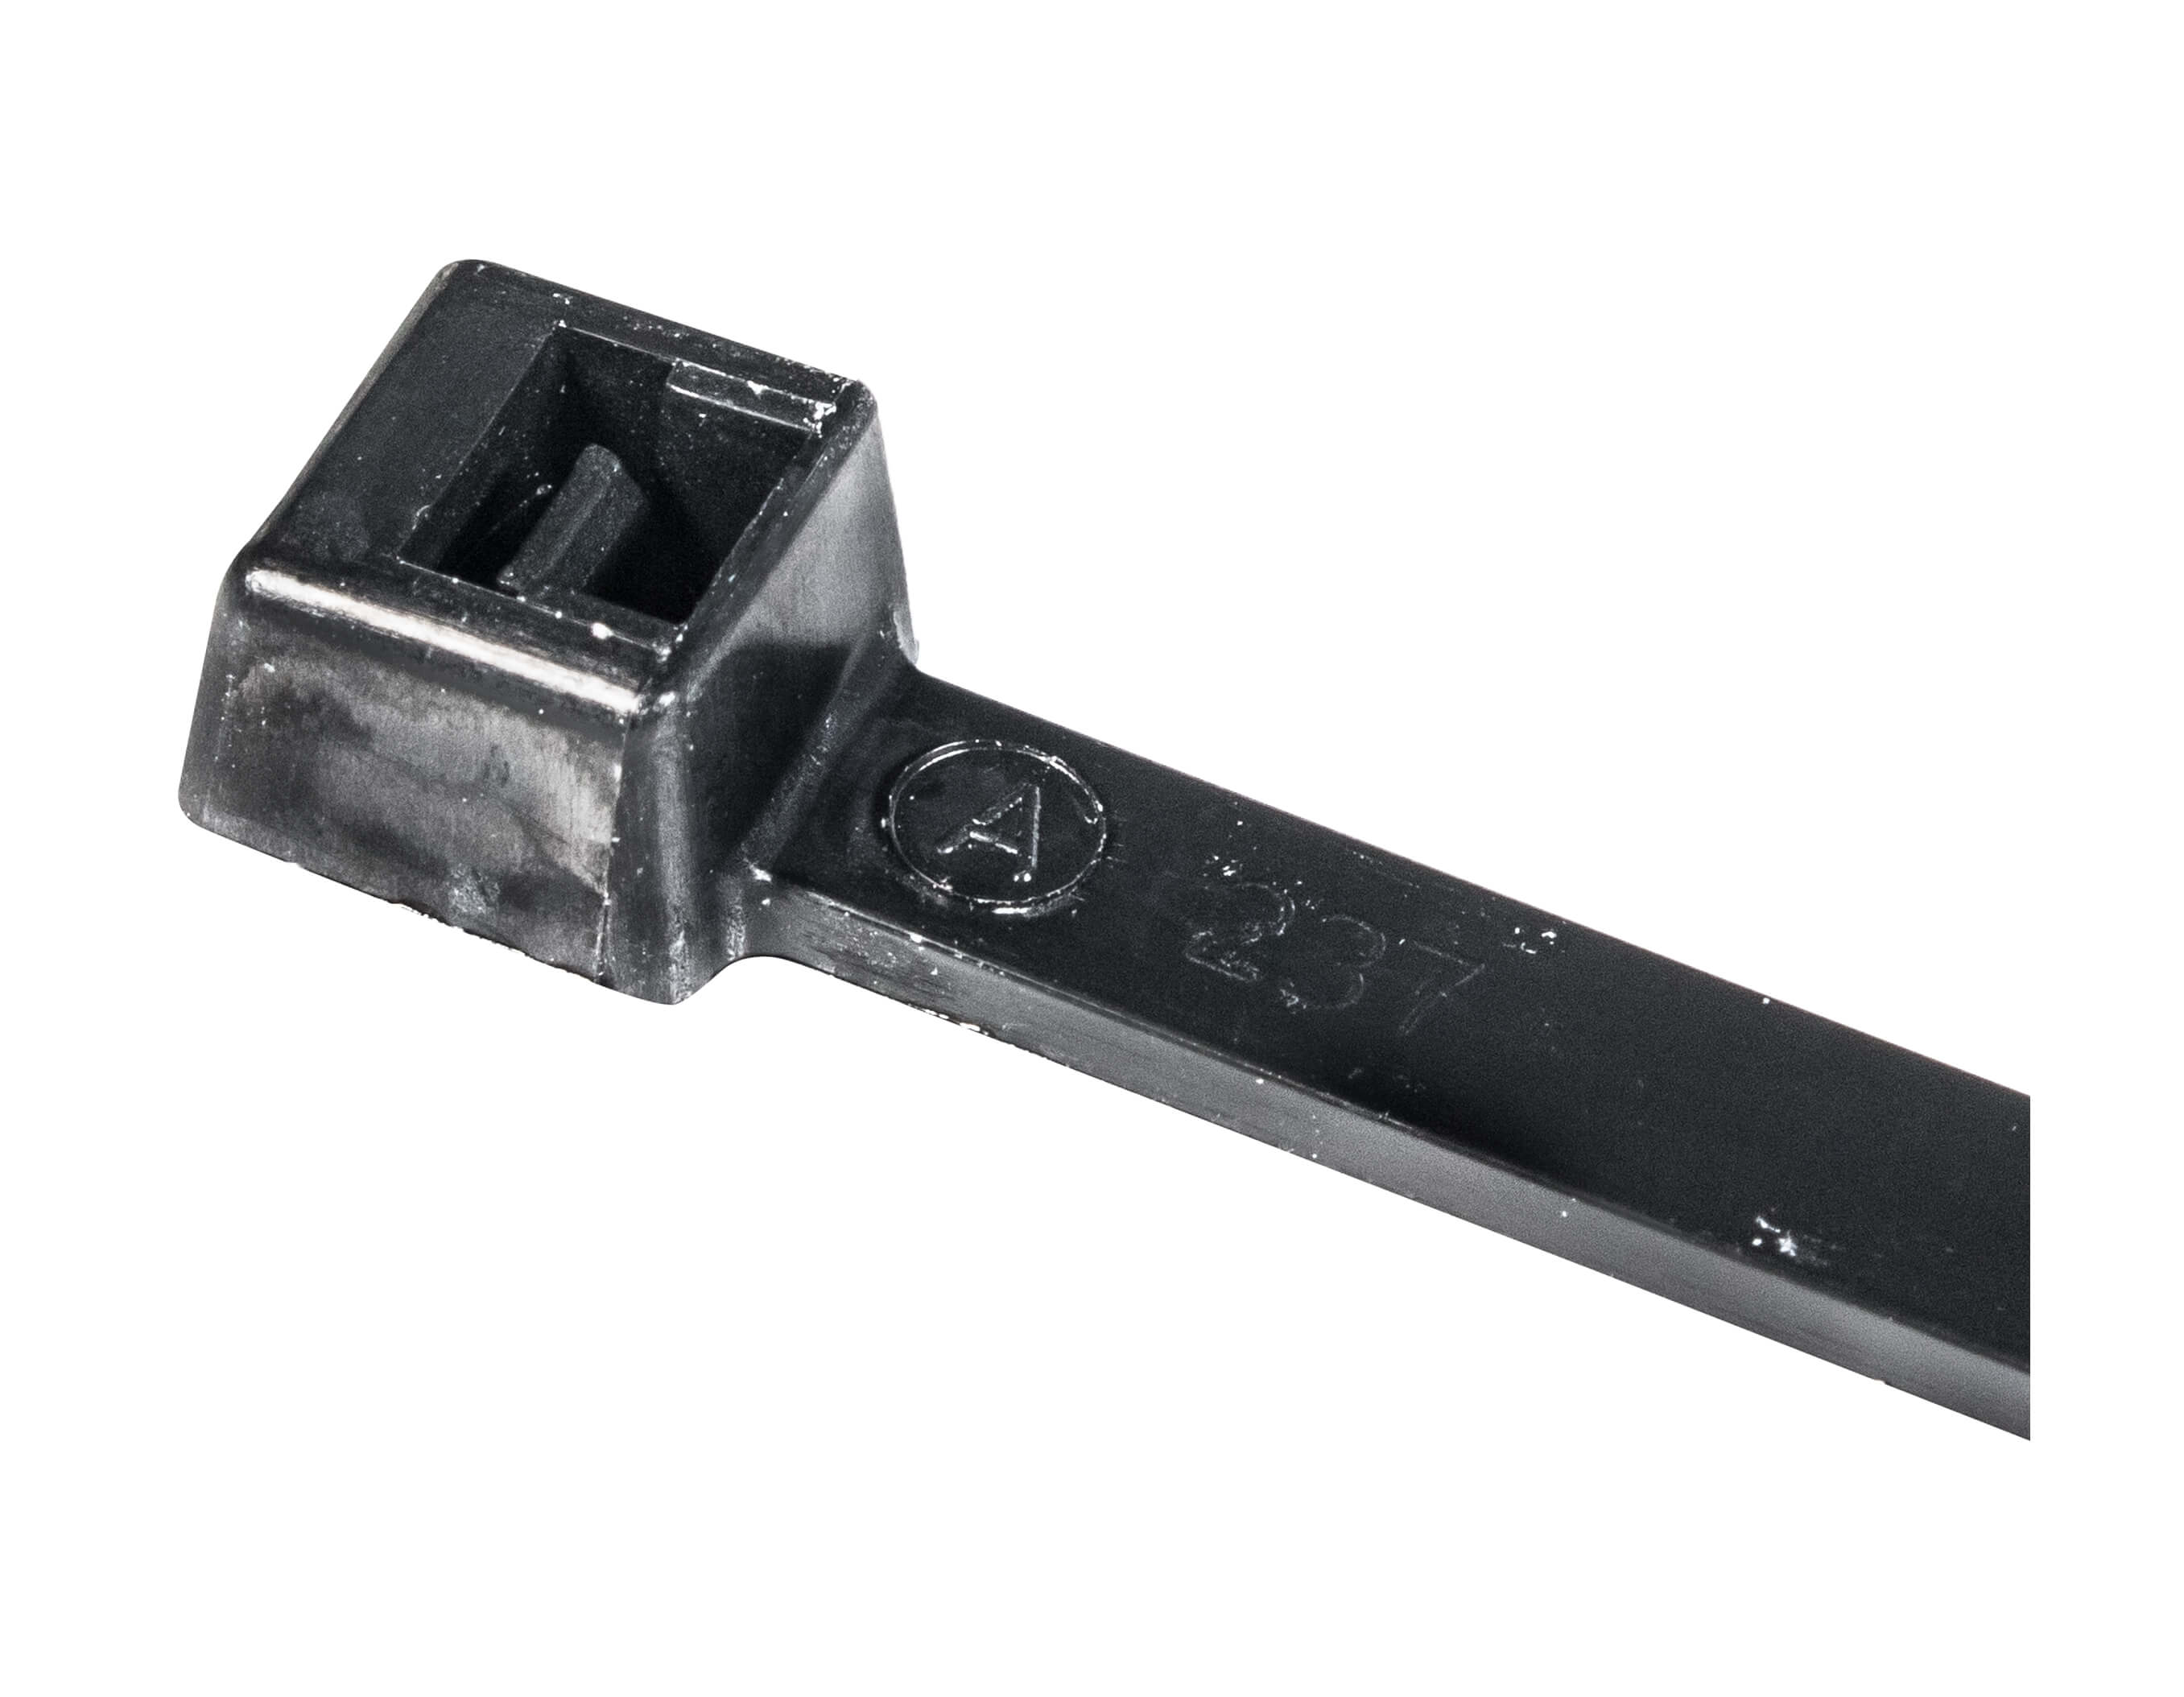 COLD TEMP. CABLE TIE BLACK 0.30 X 15.09" 120LBS